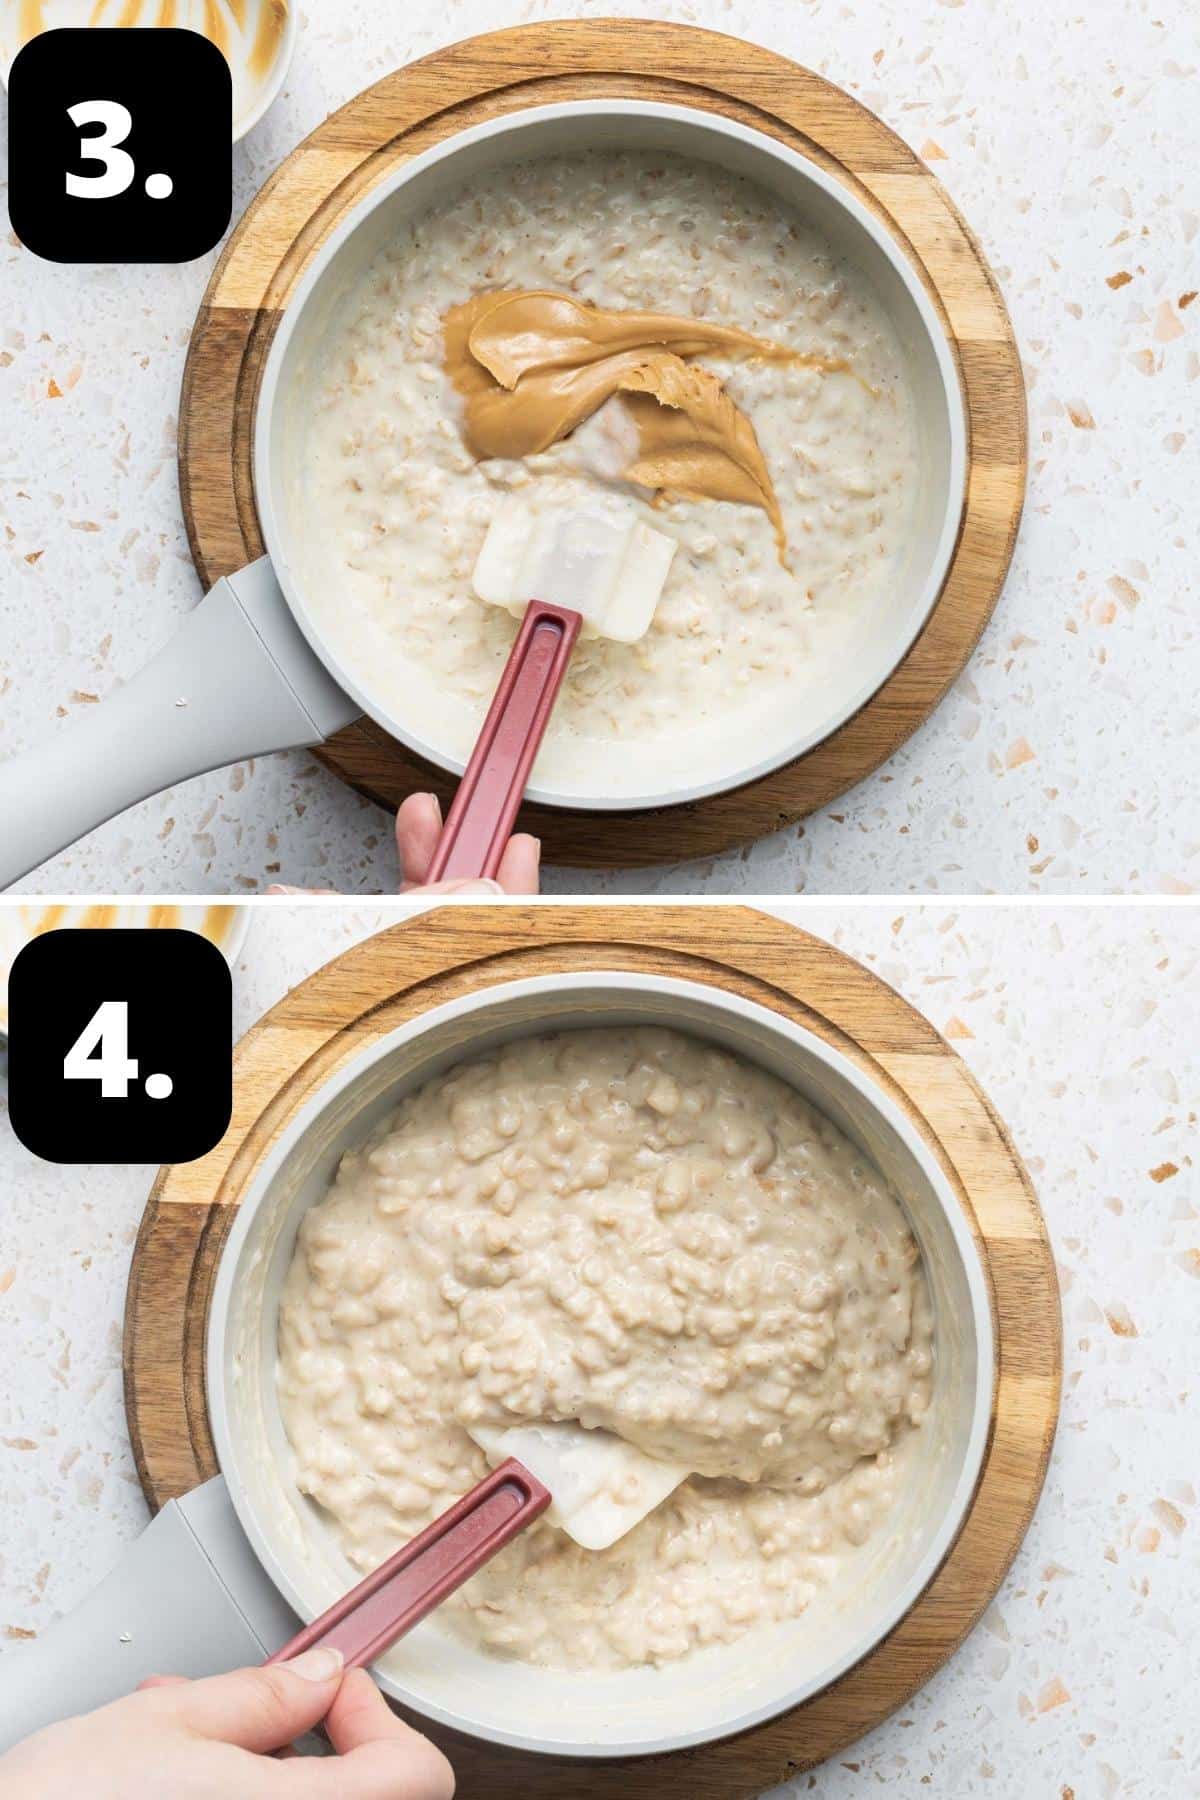 Steps 3-4 of preparing this recipe - adding the peanut butter to the cooked porridge and the combined mixture.